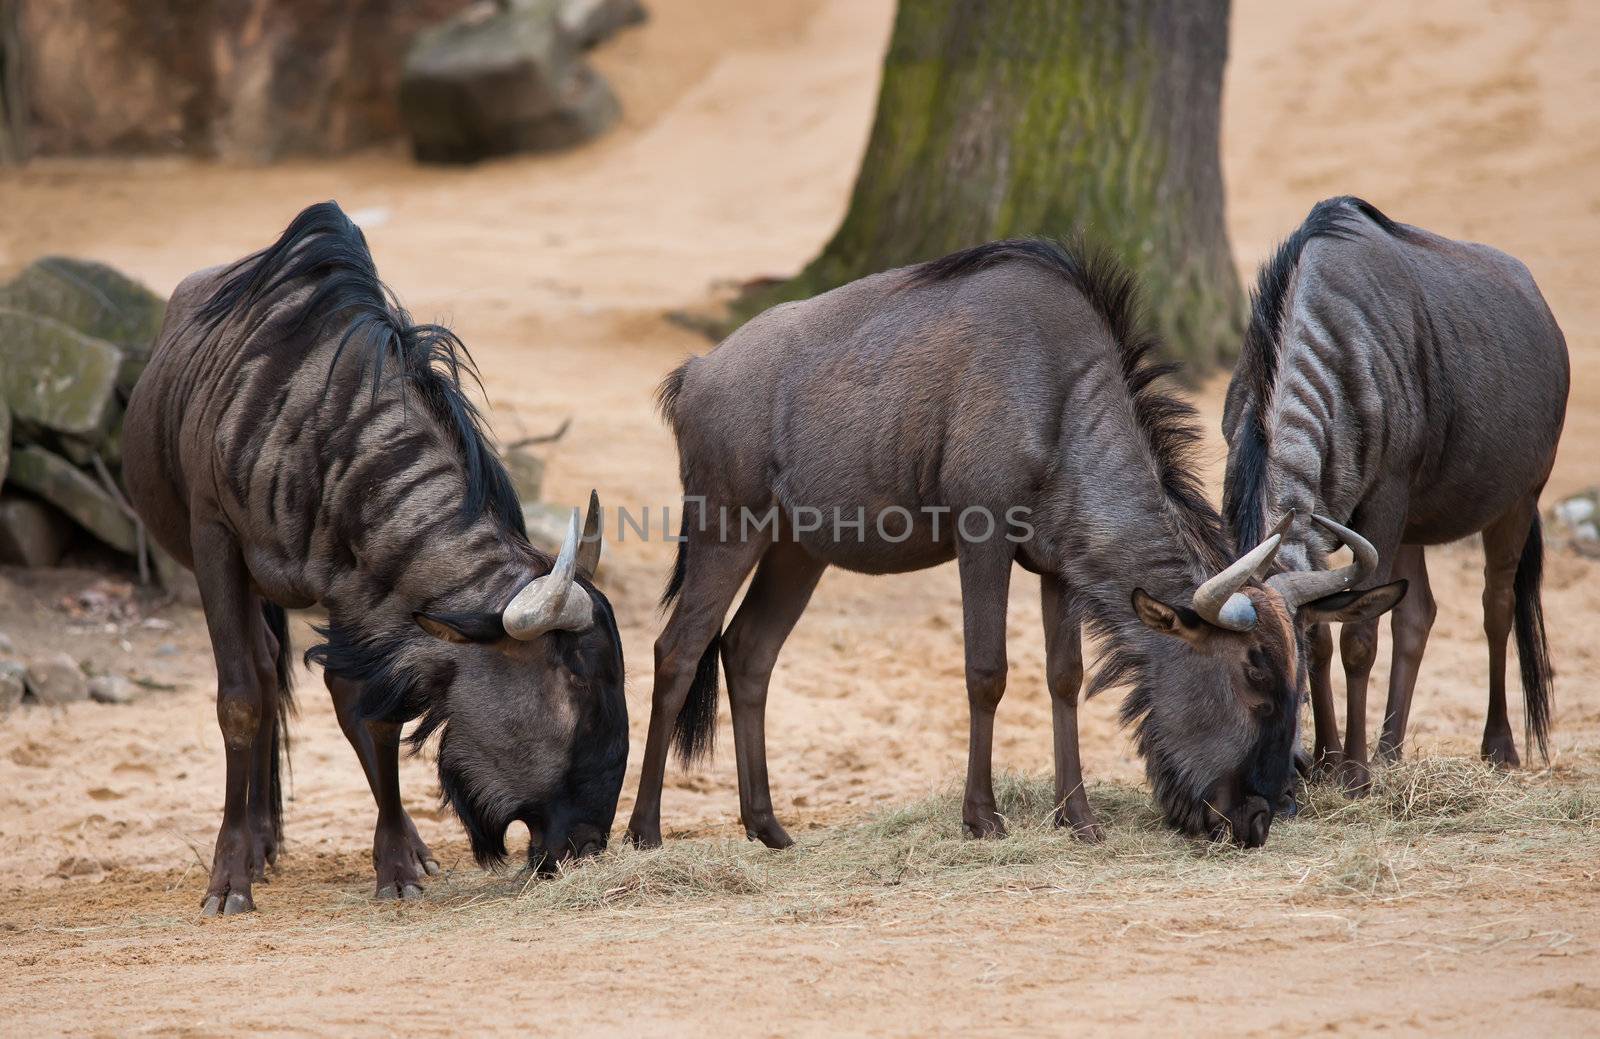 Grazing or pasturing wildebeests: animals from Africa